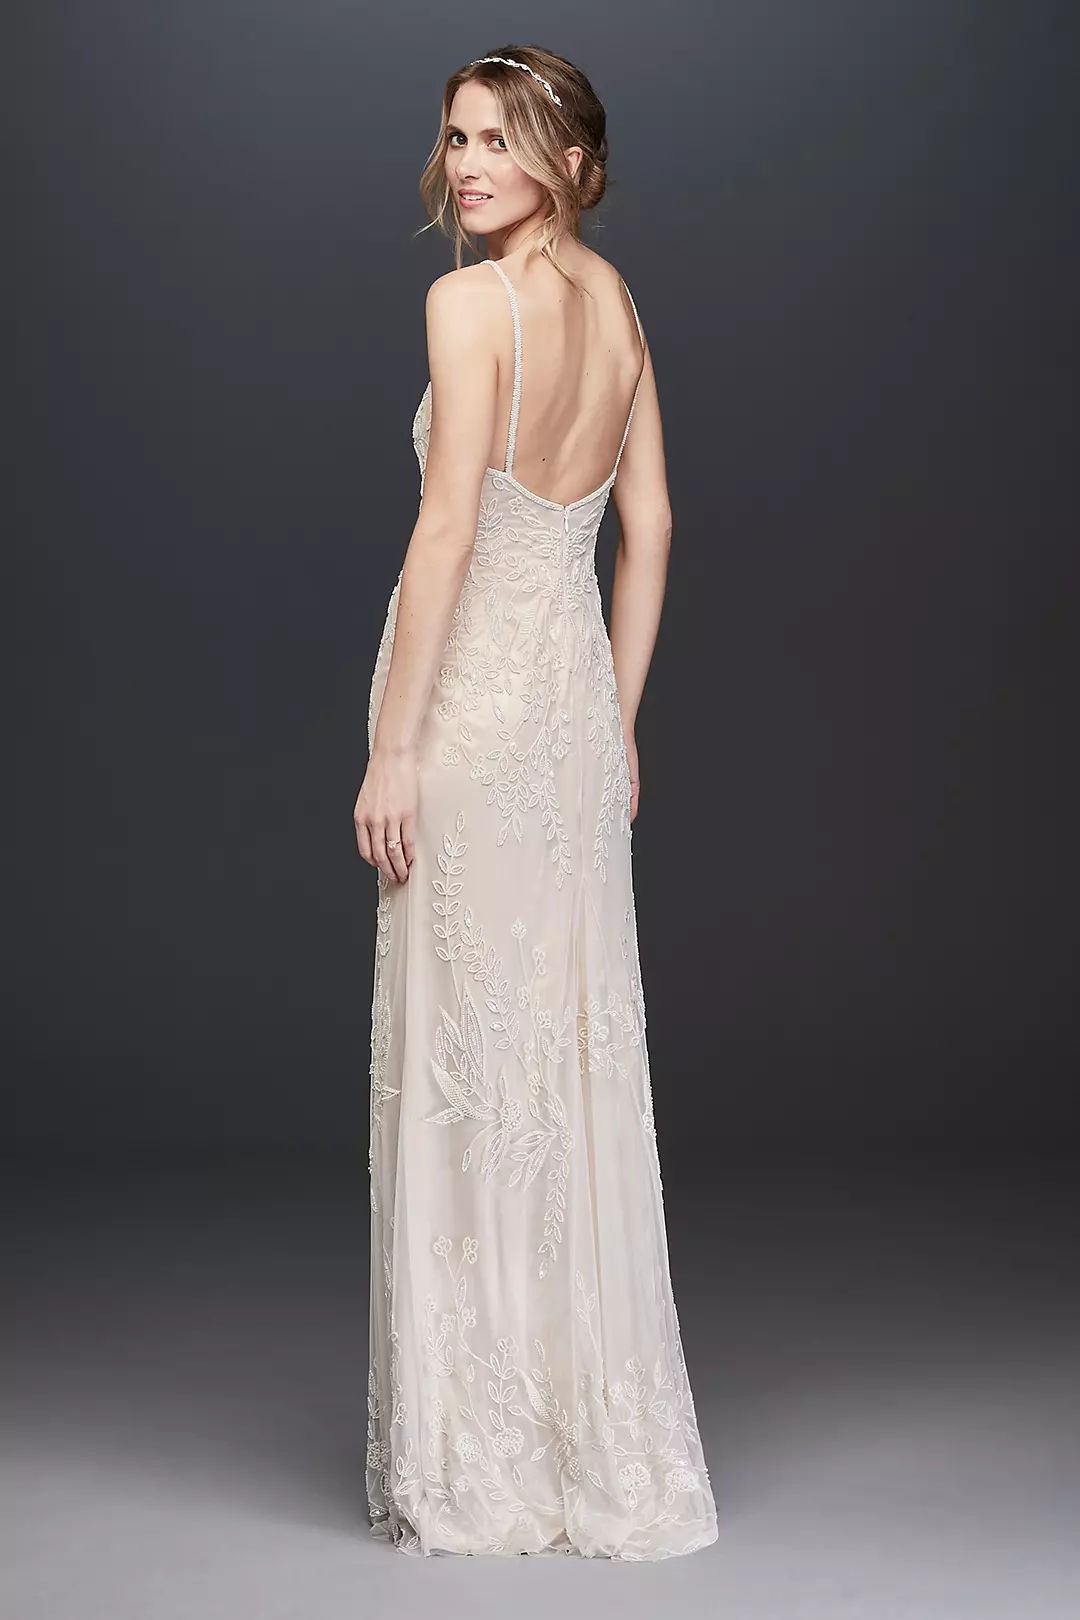 As Is Allover Floral Beaded Sheath Wedding Dress Image 2